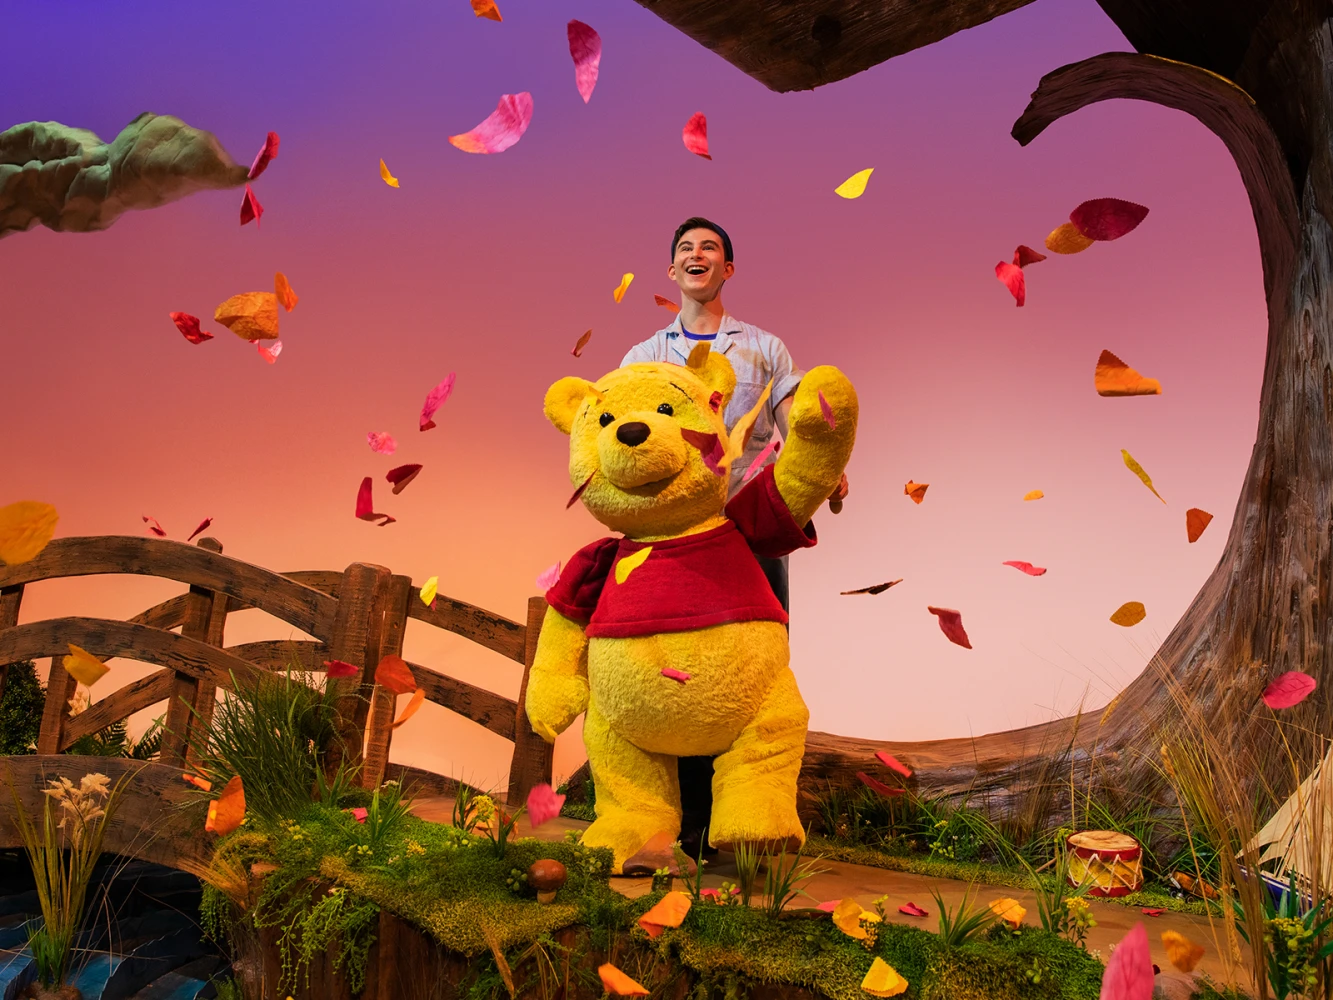 Winnie the Pooh: The New Musical Adaptation: What to expect - 2